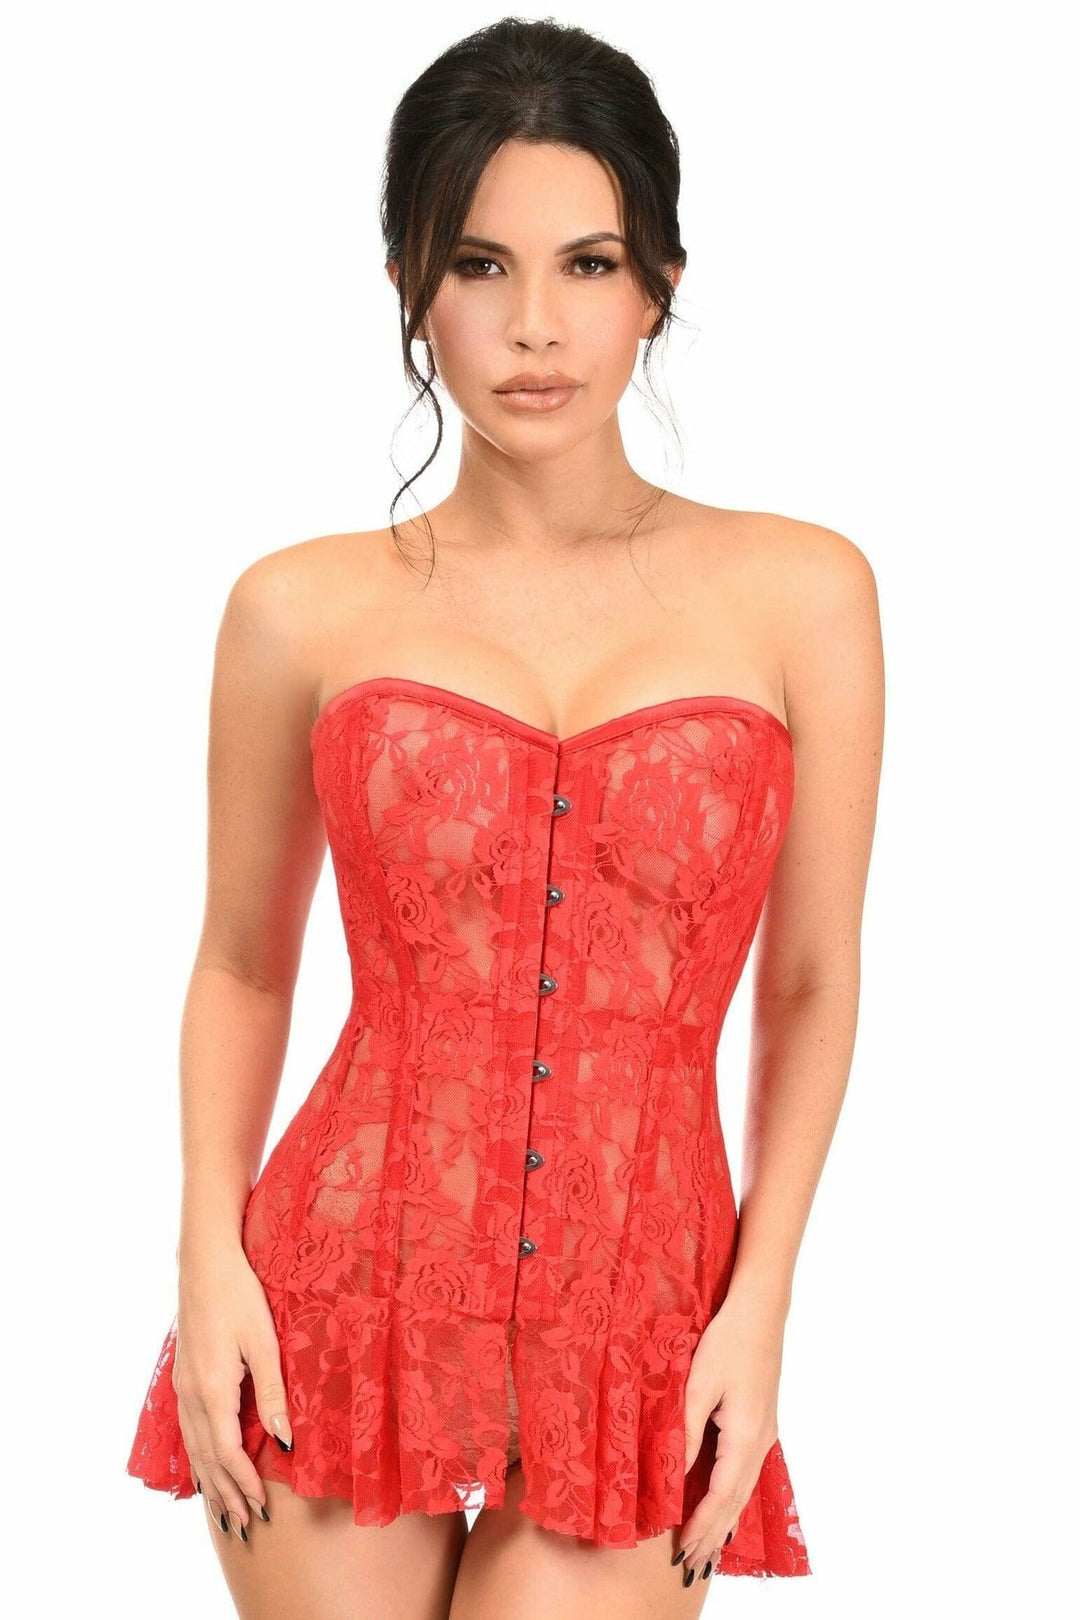 Lavish Red Sheer Lace Corset Dress-Corset Dresses-Daisy Corsets-Red-S-SEXYSHOES.COM